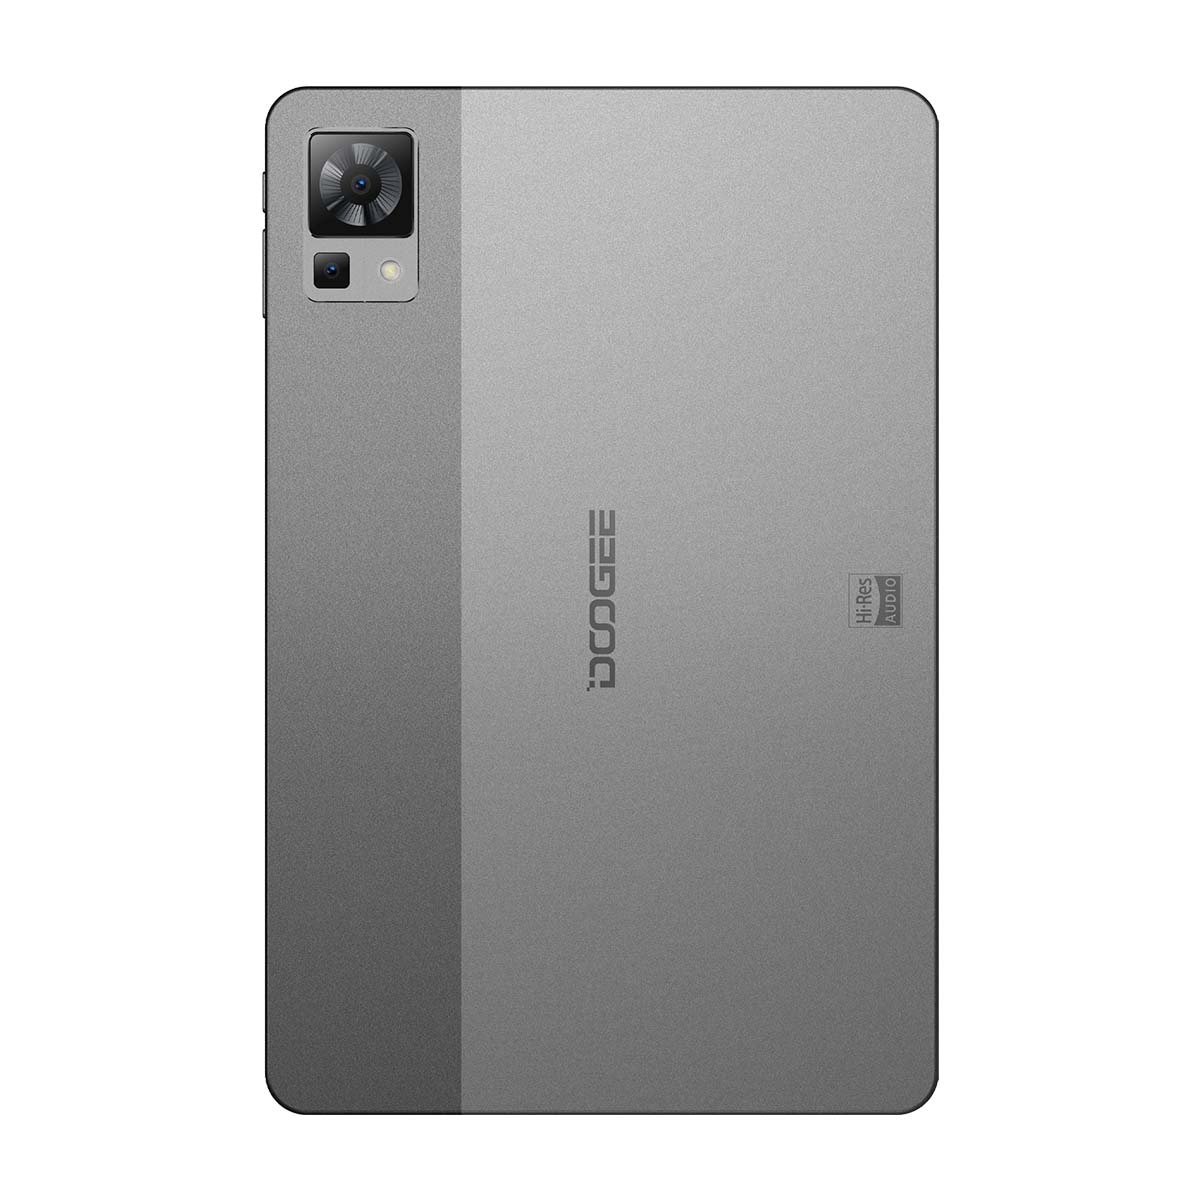 Flip Cover for Doogee T30 Pro - Mint by